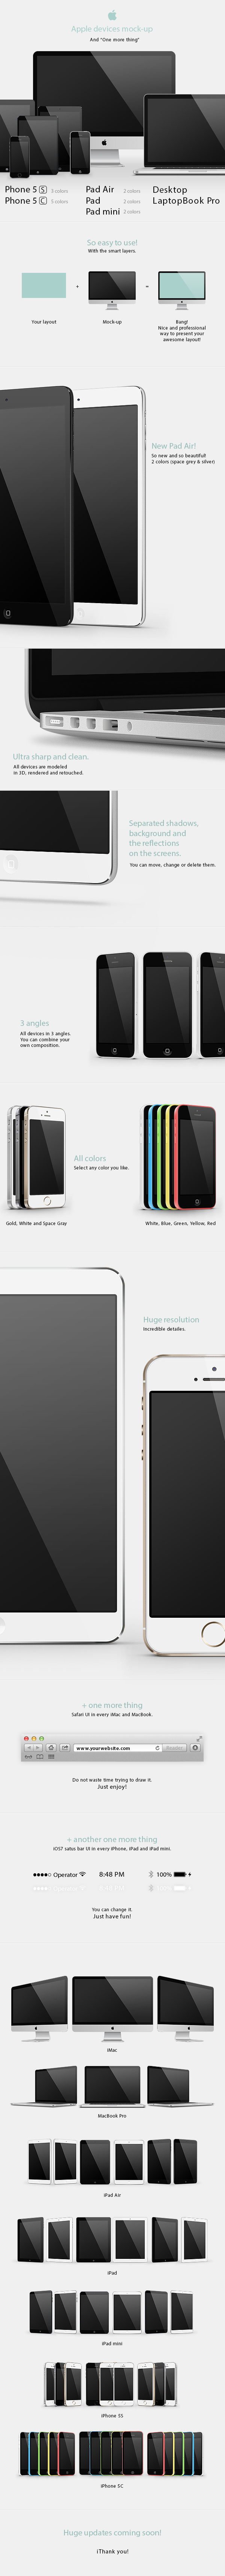 iPhone mockup #390: Apple devices mock-up on Behance https://www.behance.net/gallery/11612007/Apple-devices-mock-up #...